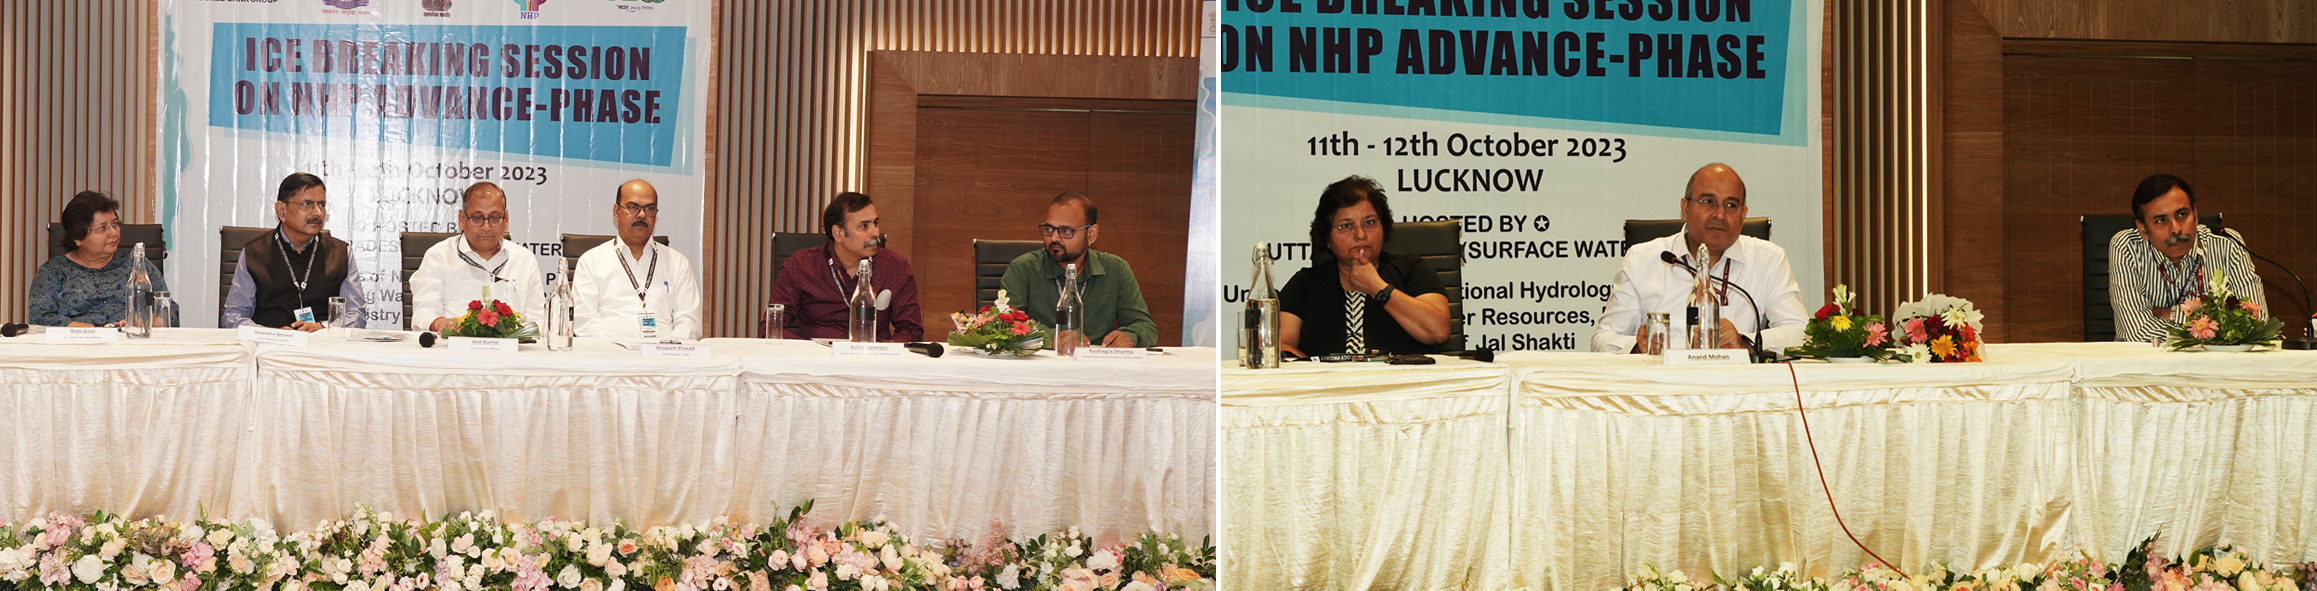 Ice Breaking Session on NHP Advance, Lucknow, October 11-12, 2023